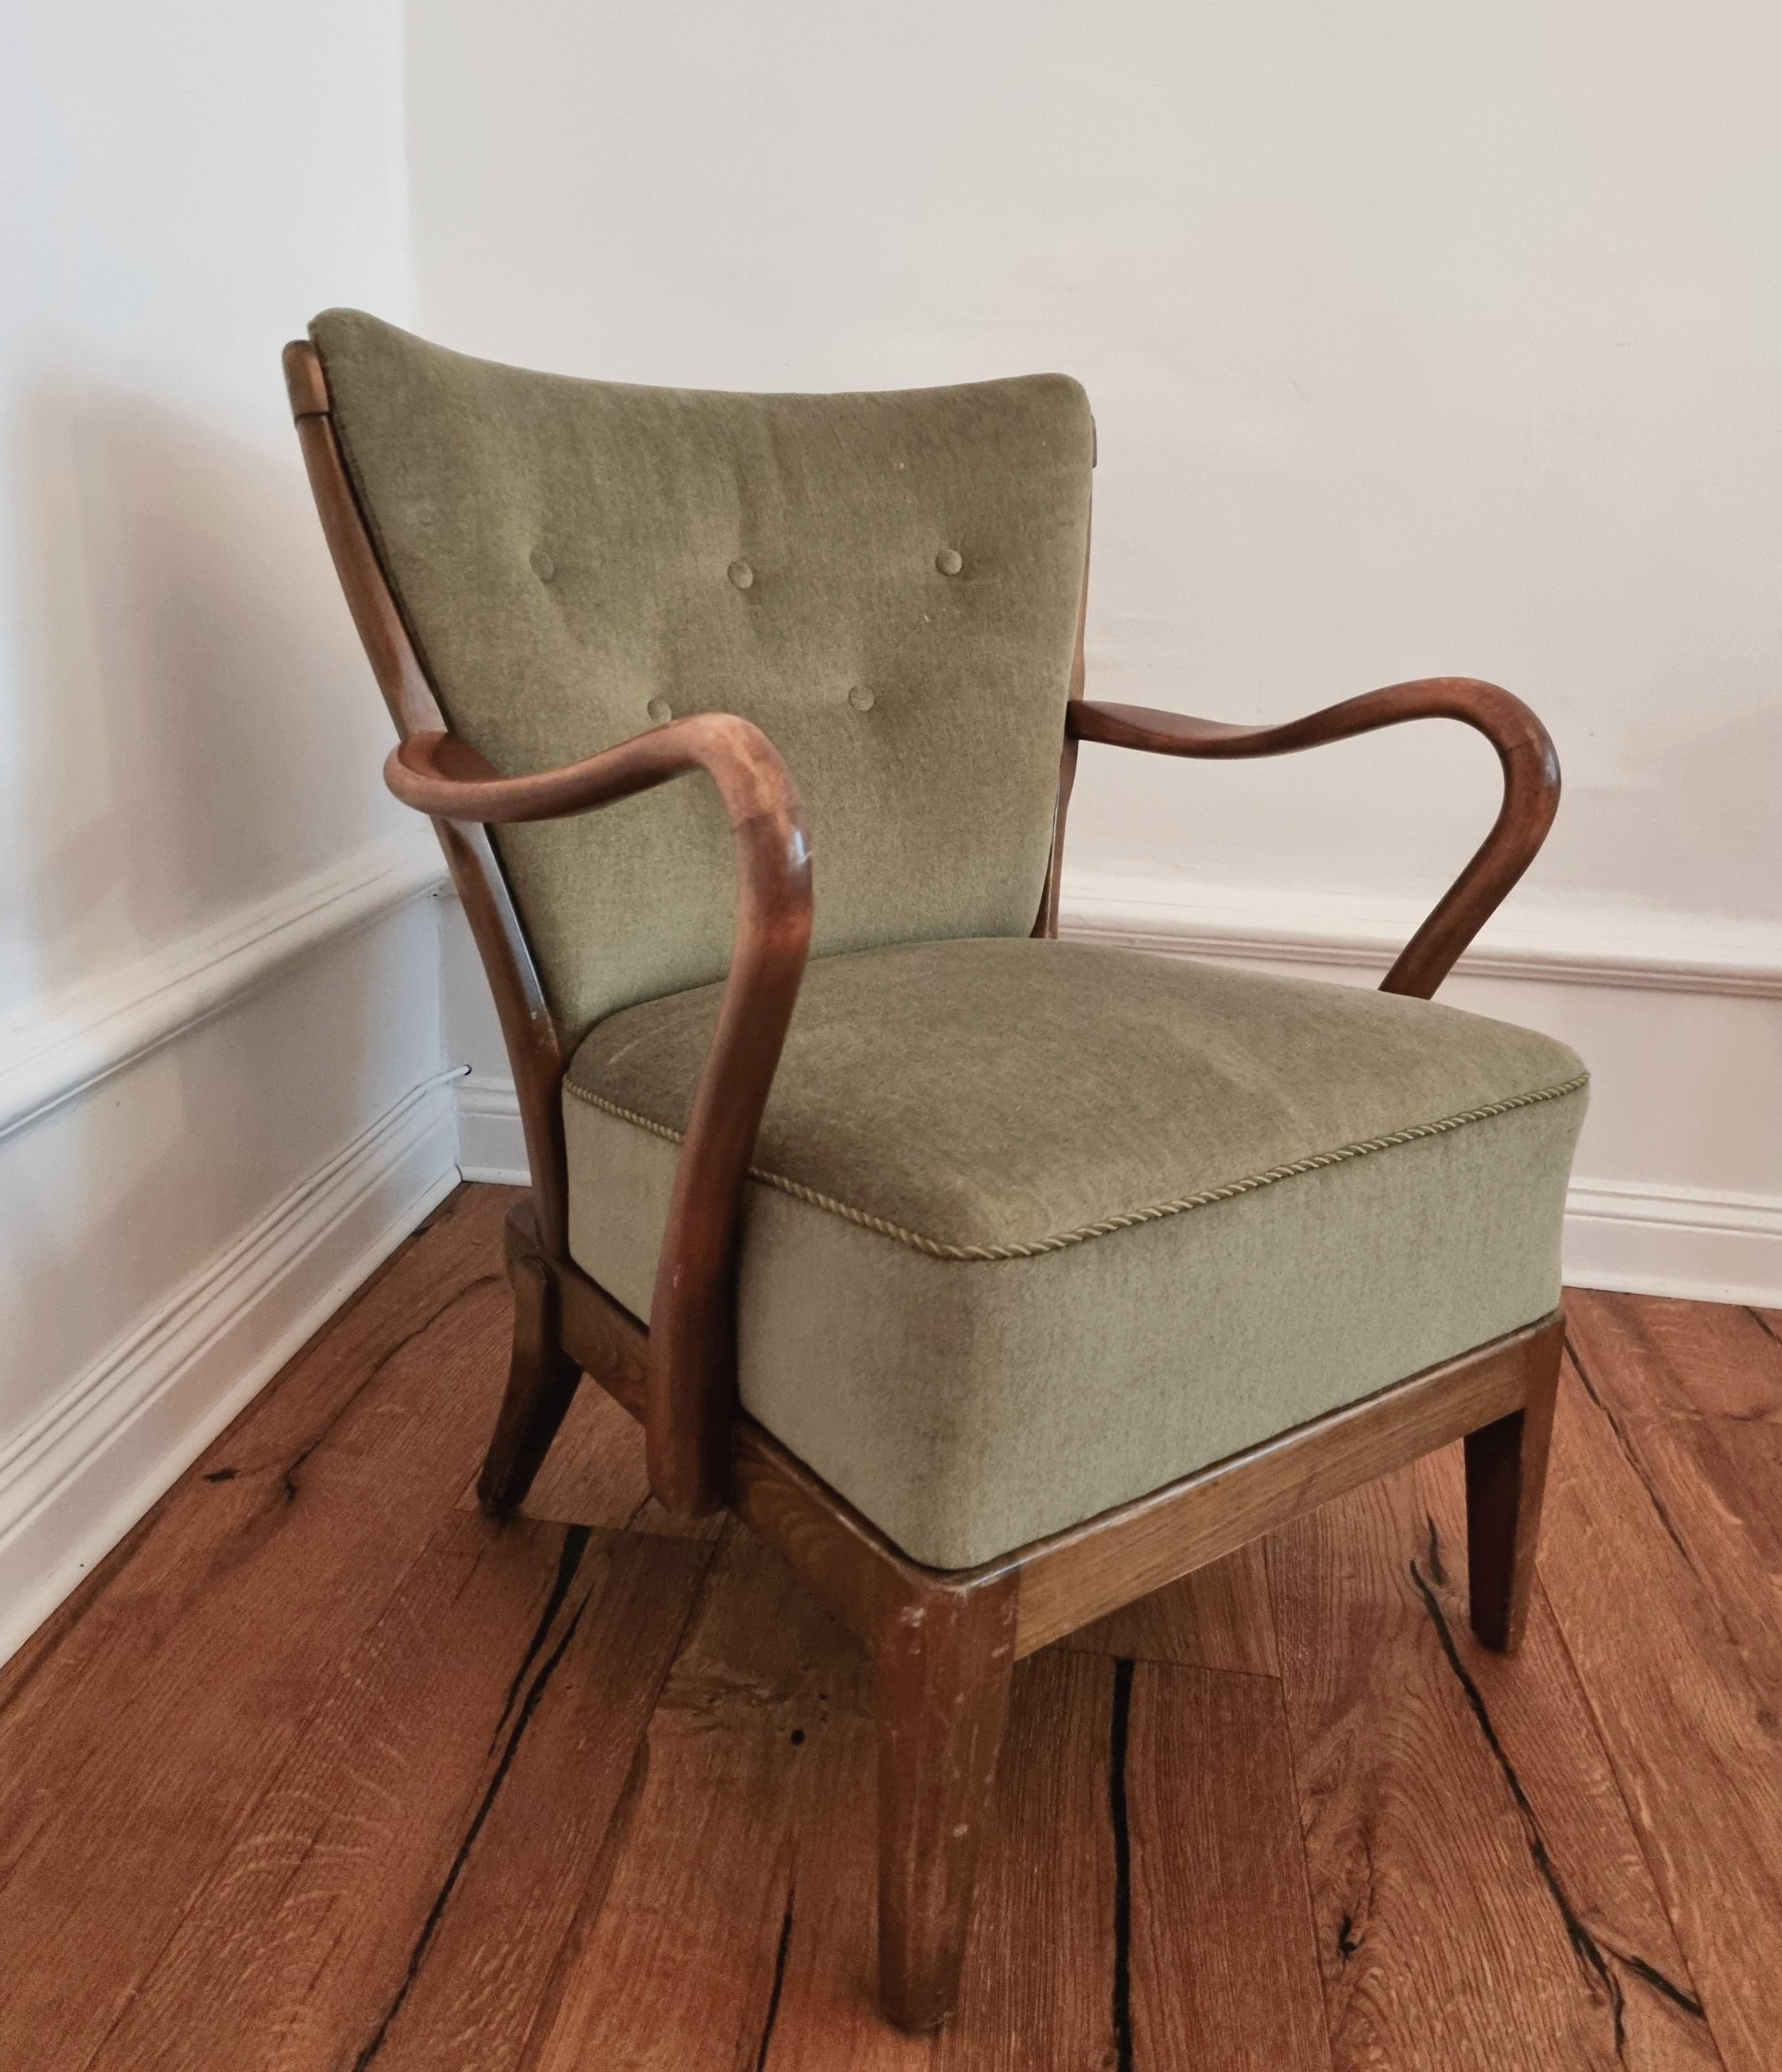 A rare easy chair (model 93) with beautiful rounded, sculptural armrests and slatted back. Excellent craftmanship from Denmark, designed in 1944 by Alfred Christensen. Manufactured in the 1940s by Slagelse Møbelværk. 

The chairs frame functions